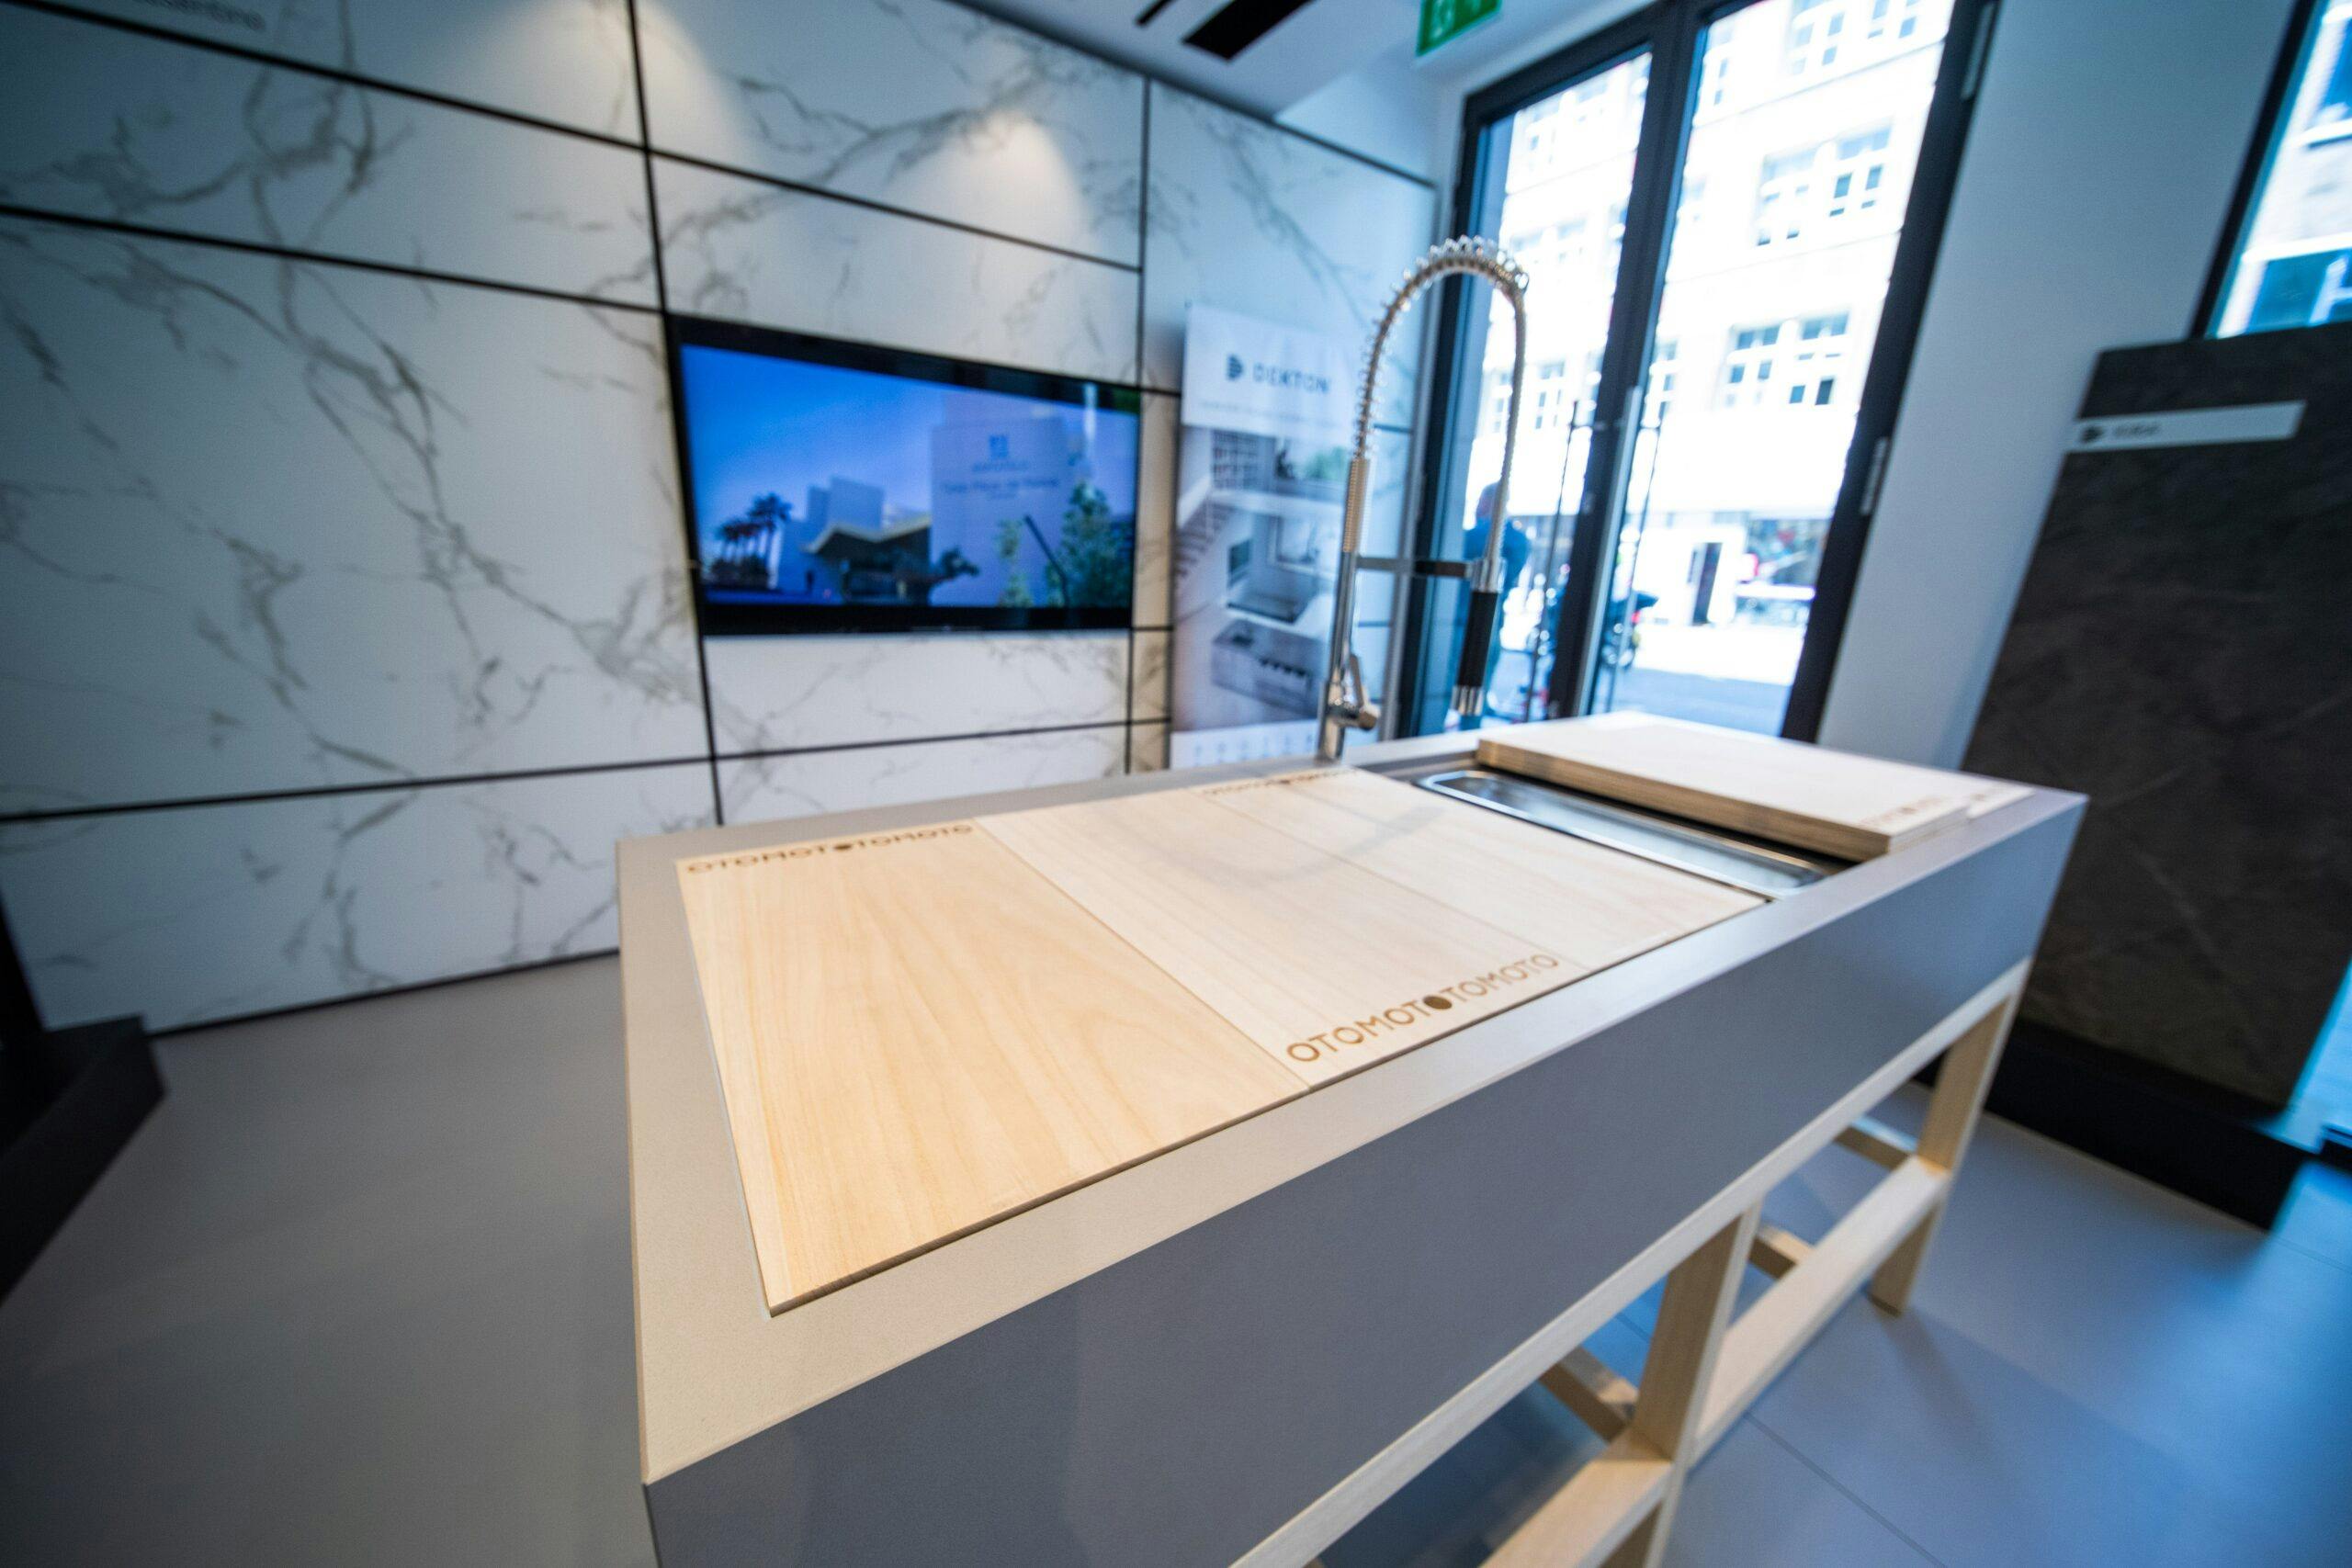 Image 34 of CE6I8312 1 scaled in The OTOMOTO Kitchen Sink at Clerkenwell Design Week in London - Cosentino